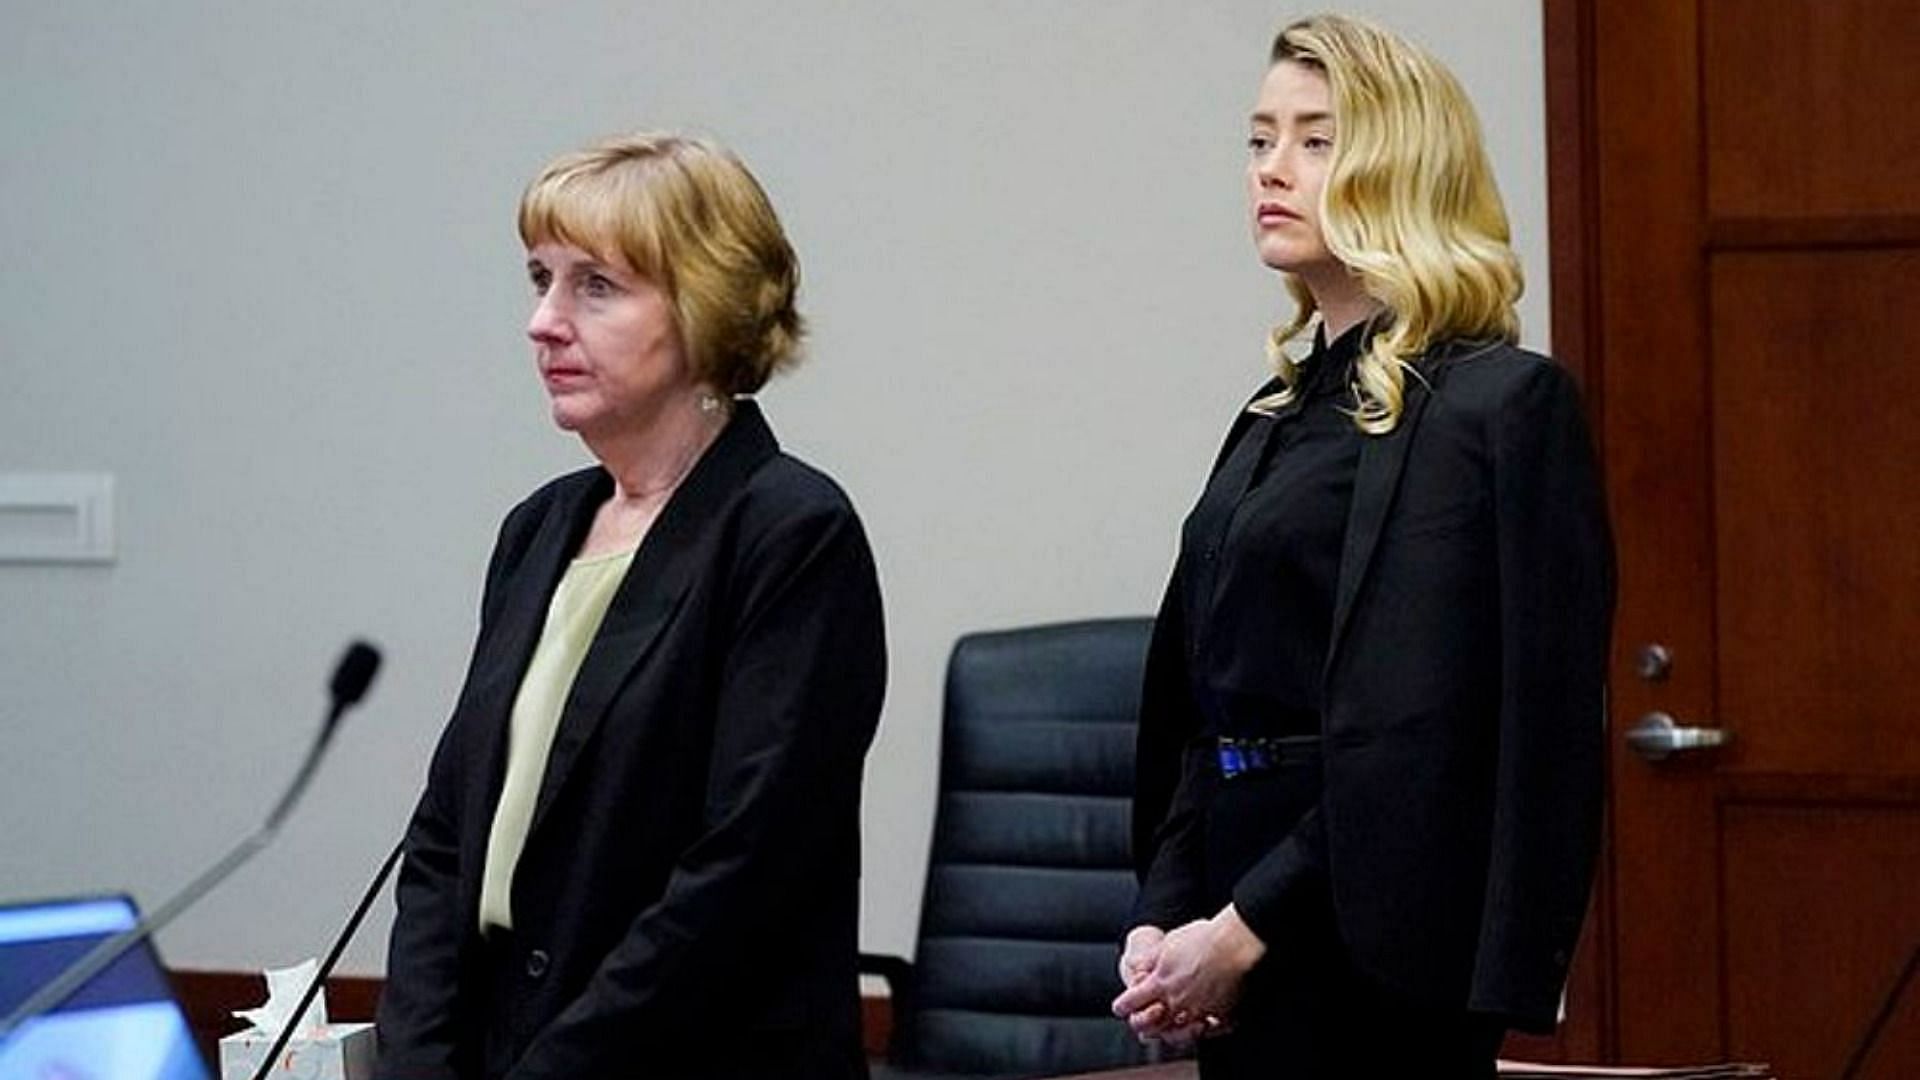 Amber Heard&#039;s lawyer Elaine Bredehoft reportedly cried after case&#039;s closing arguments (Image via AP)